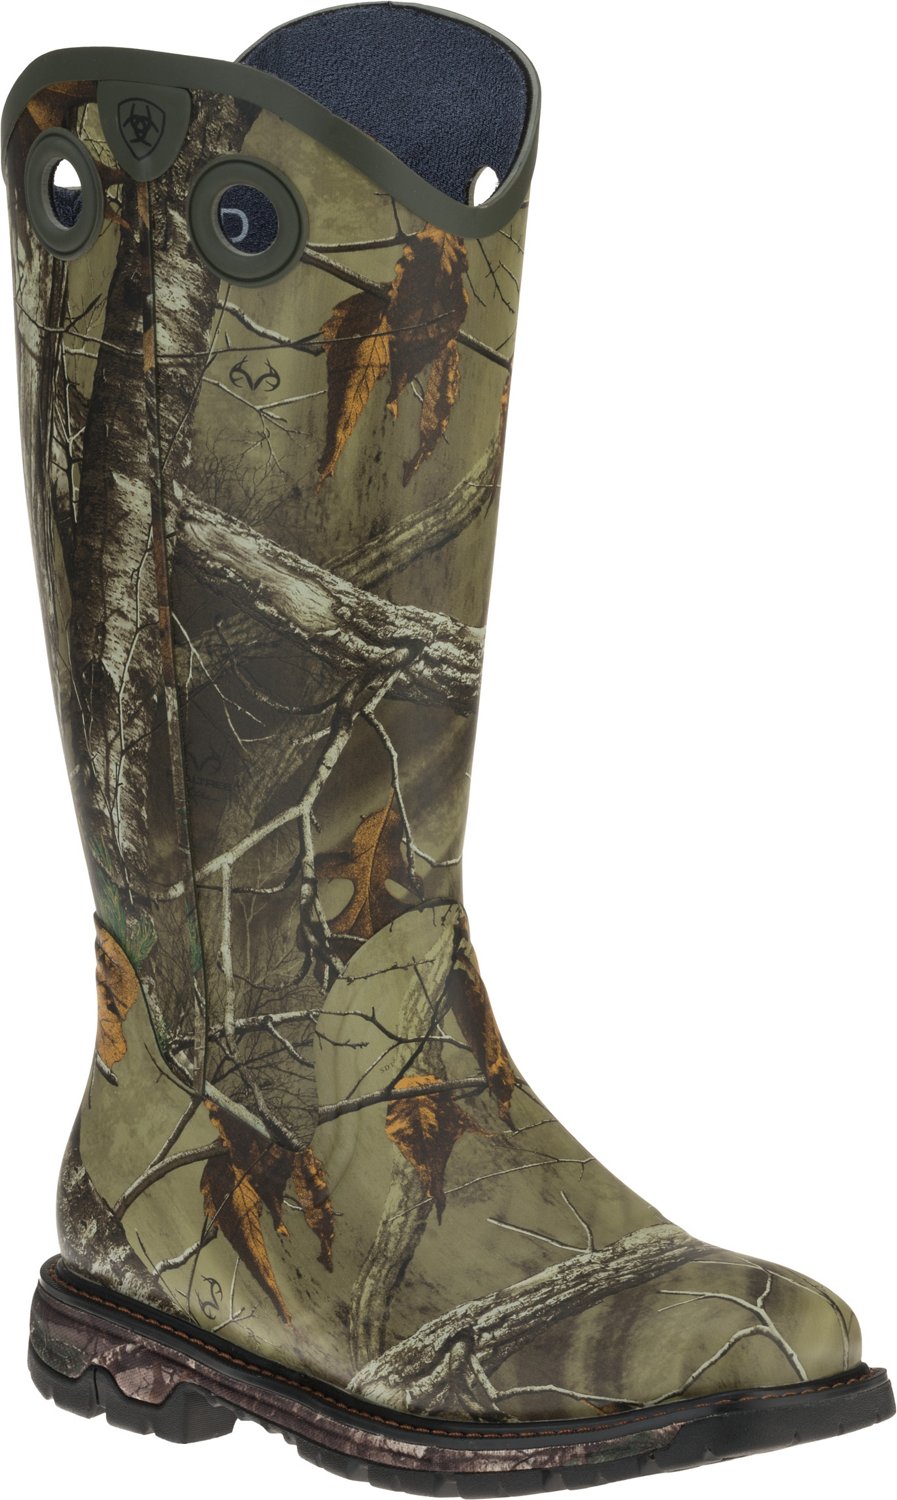 Ariat Men's Conquest Buckaroo Realtree Xtra® Rubber Hunting Boots ...